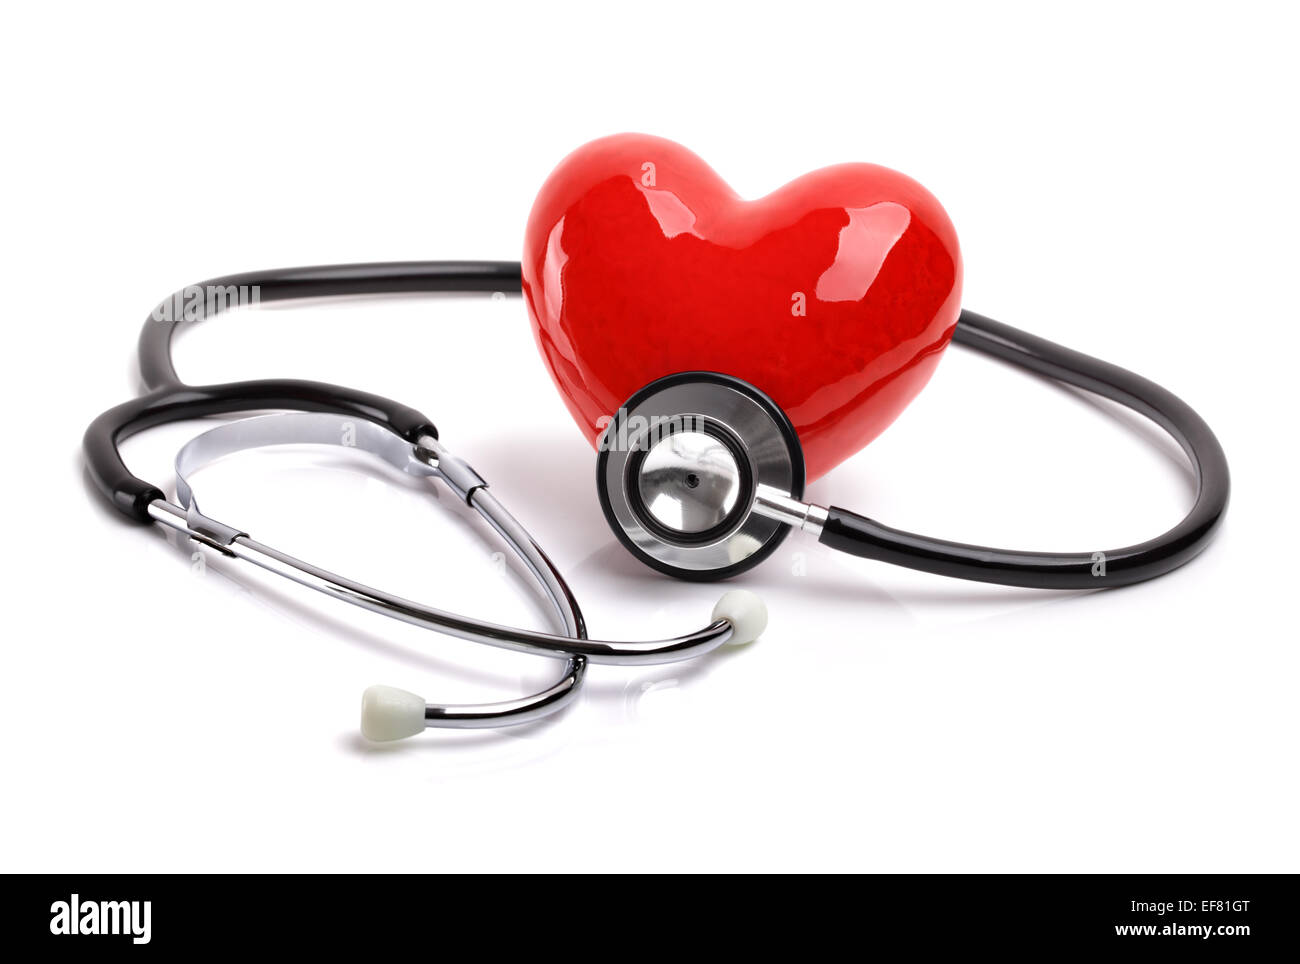 Stethoscope and heart Stock Photo